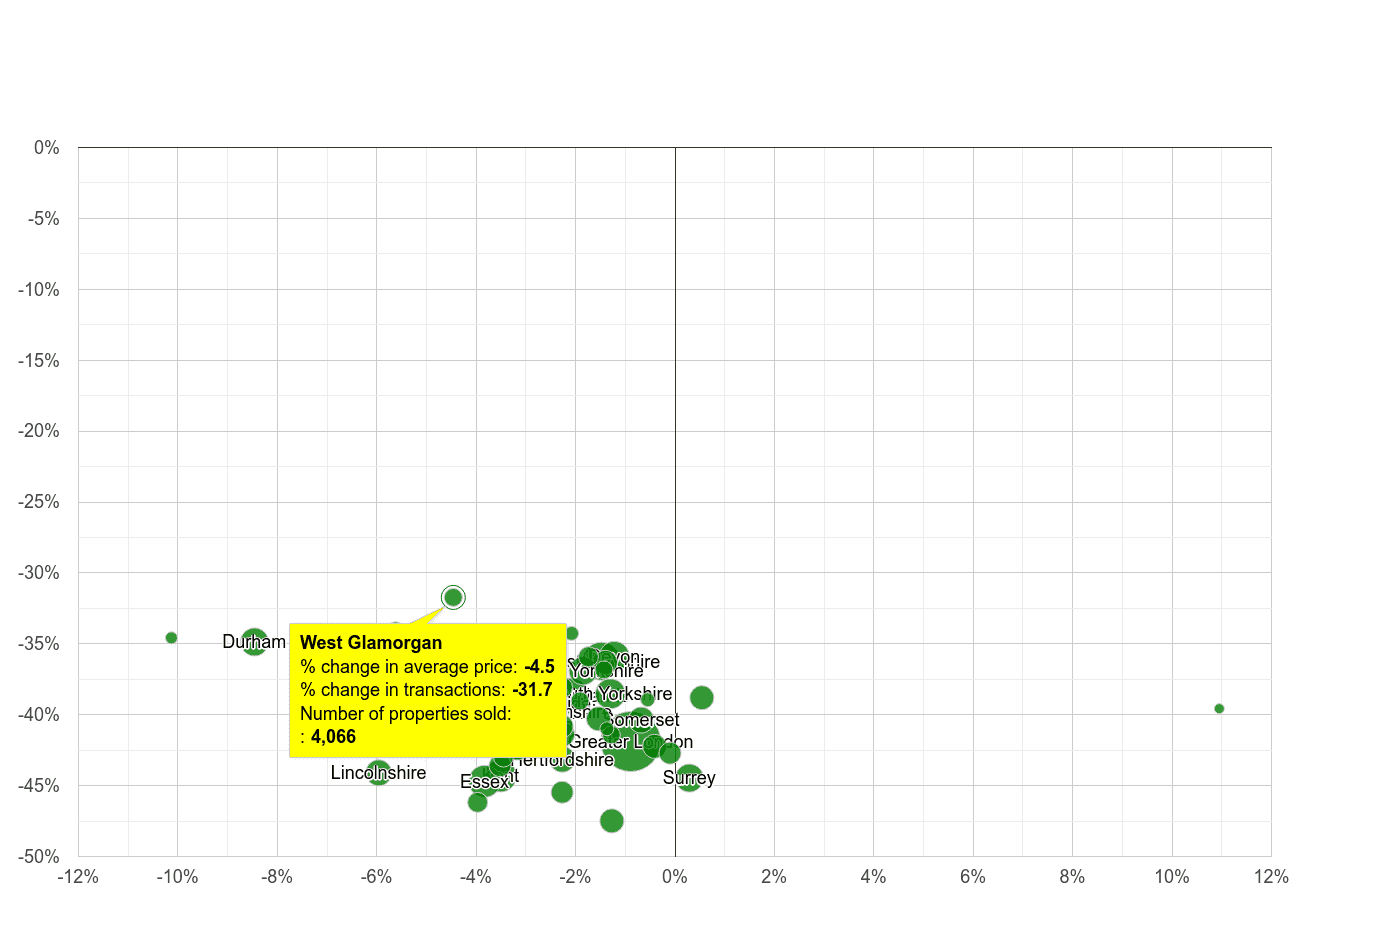 West Glamorgan property price and sales volume change relative to other counties